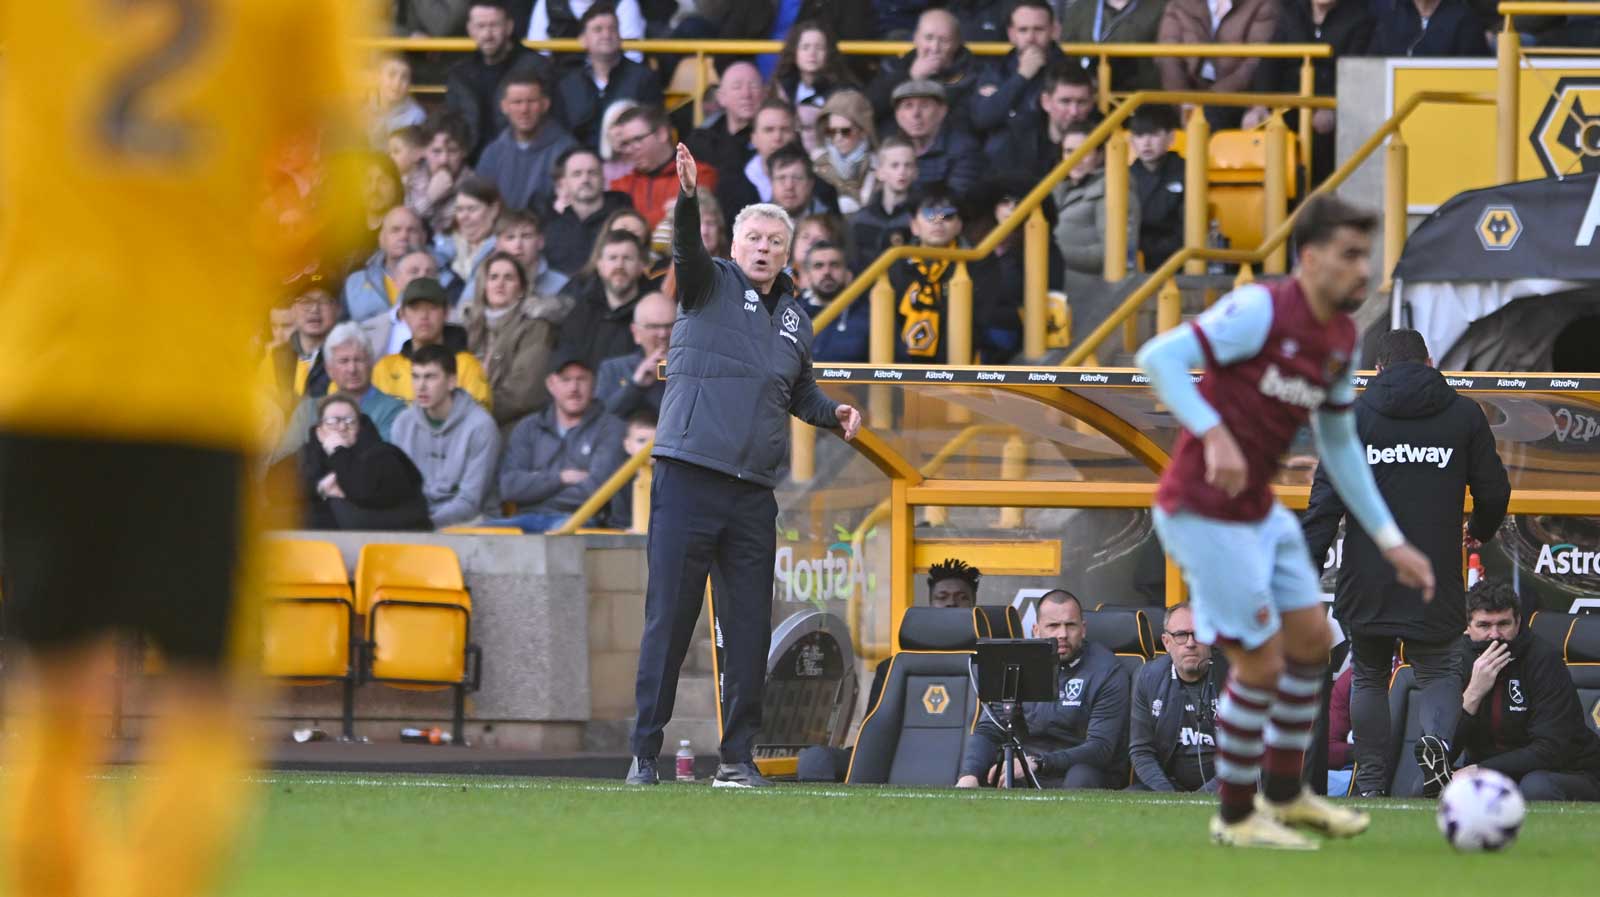 David Moyes gives instructions from the sidelines at Wolves